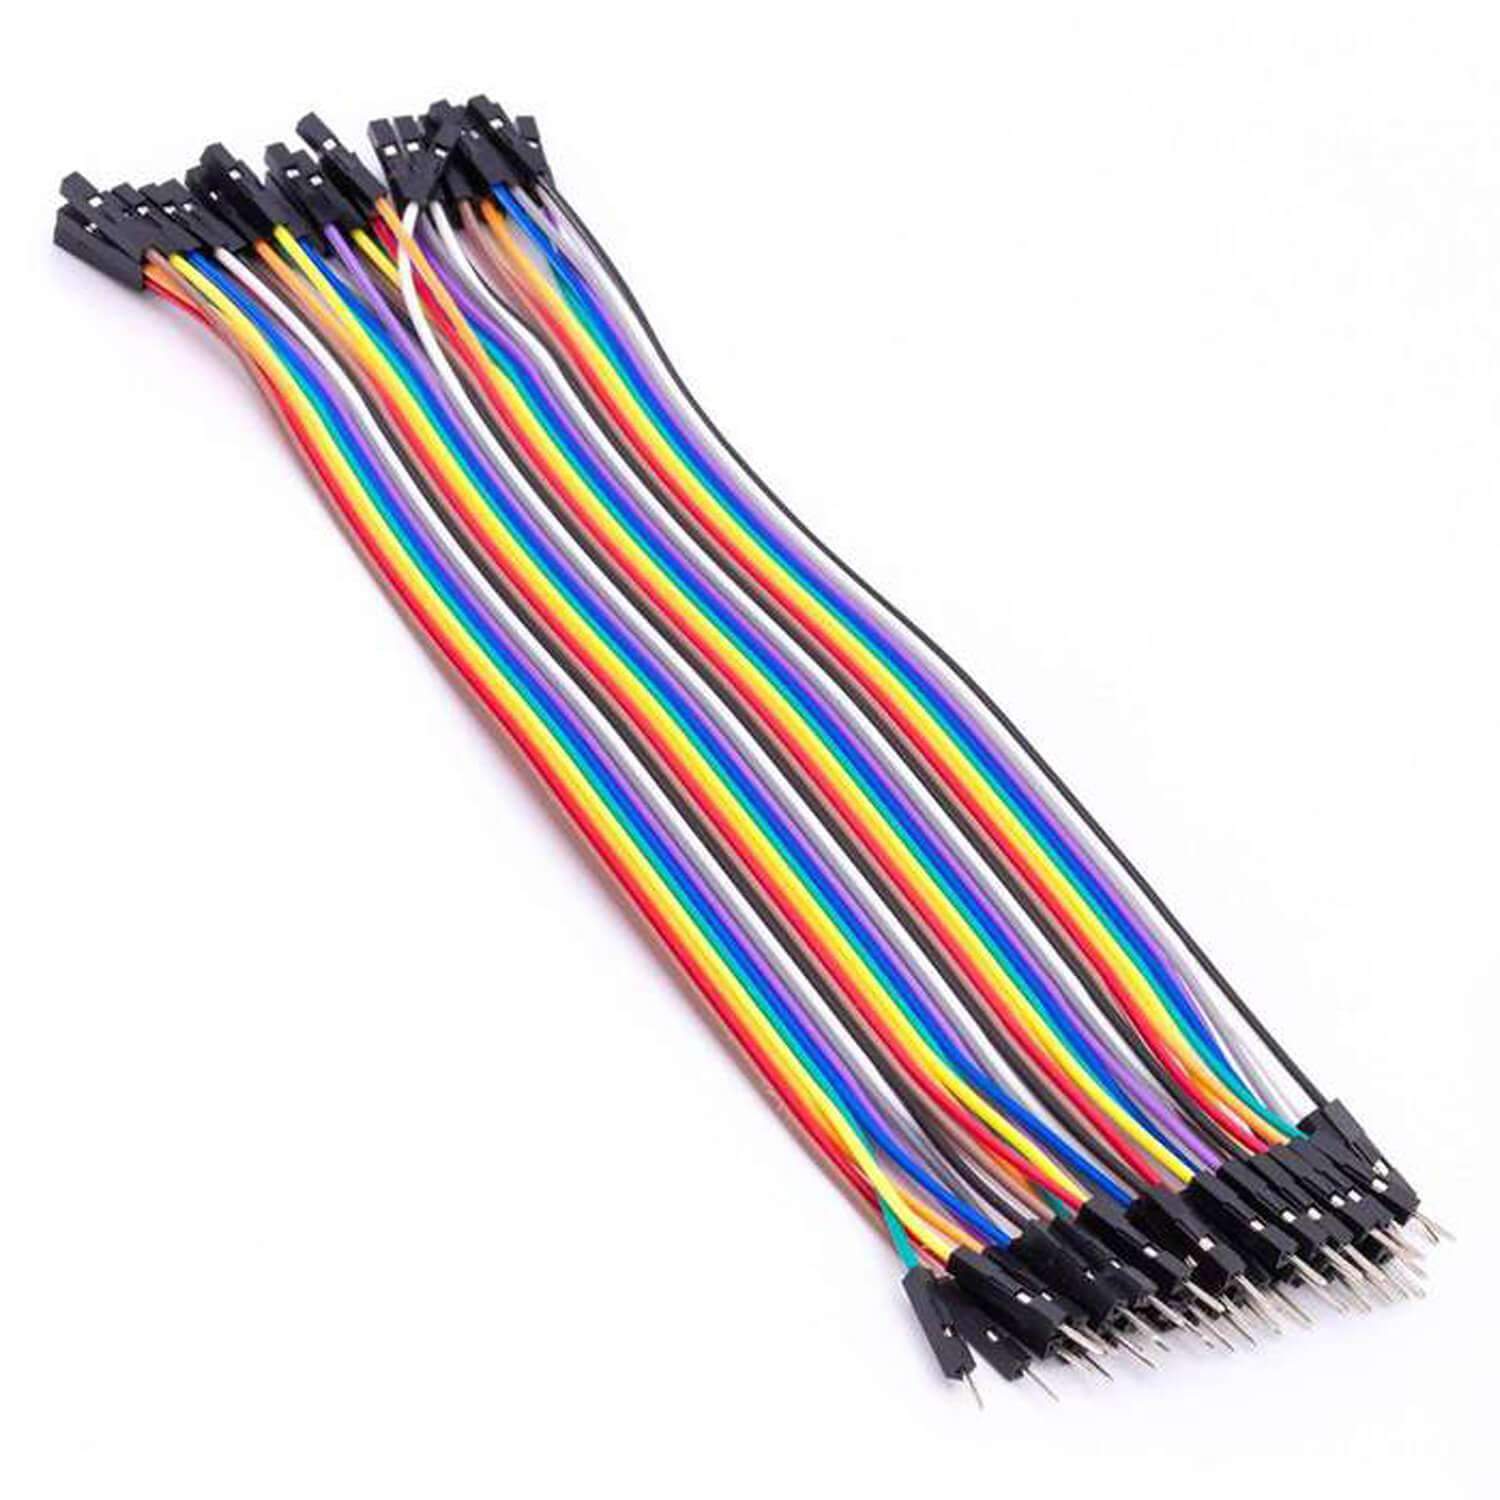 Jumper Wire Female to Male 20 centimeters - 40 pcs.